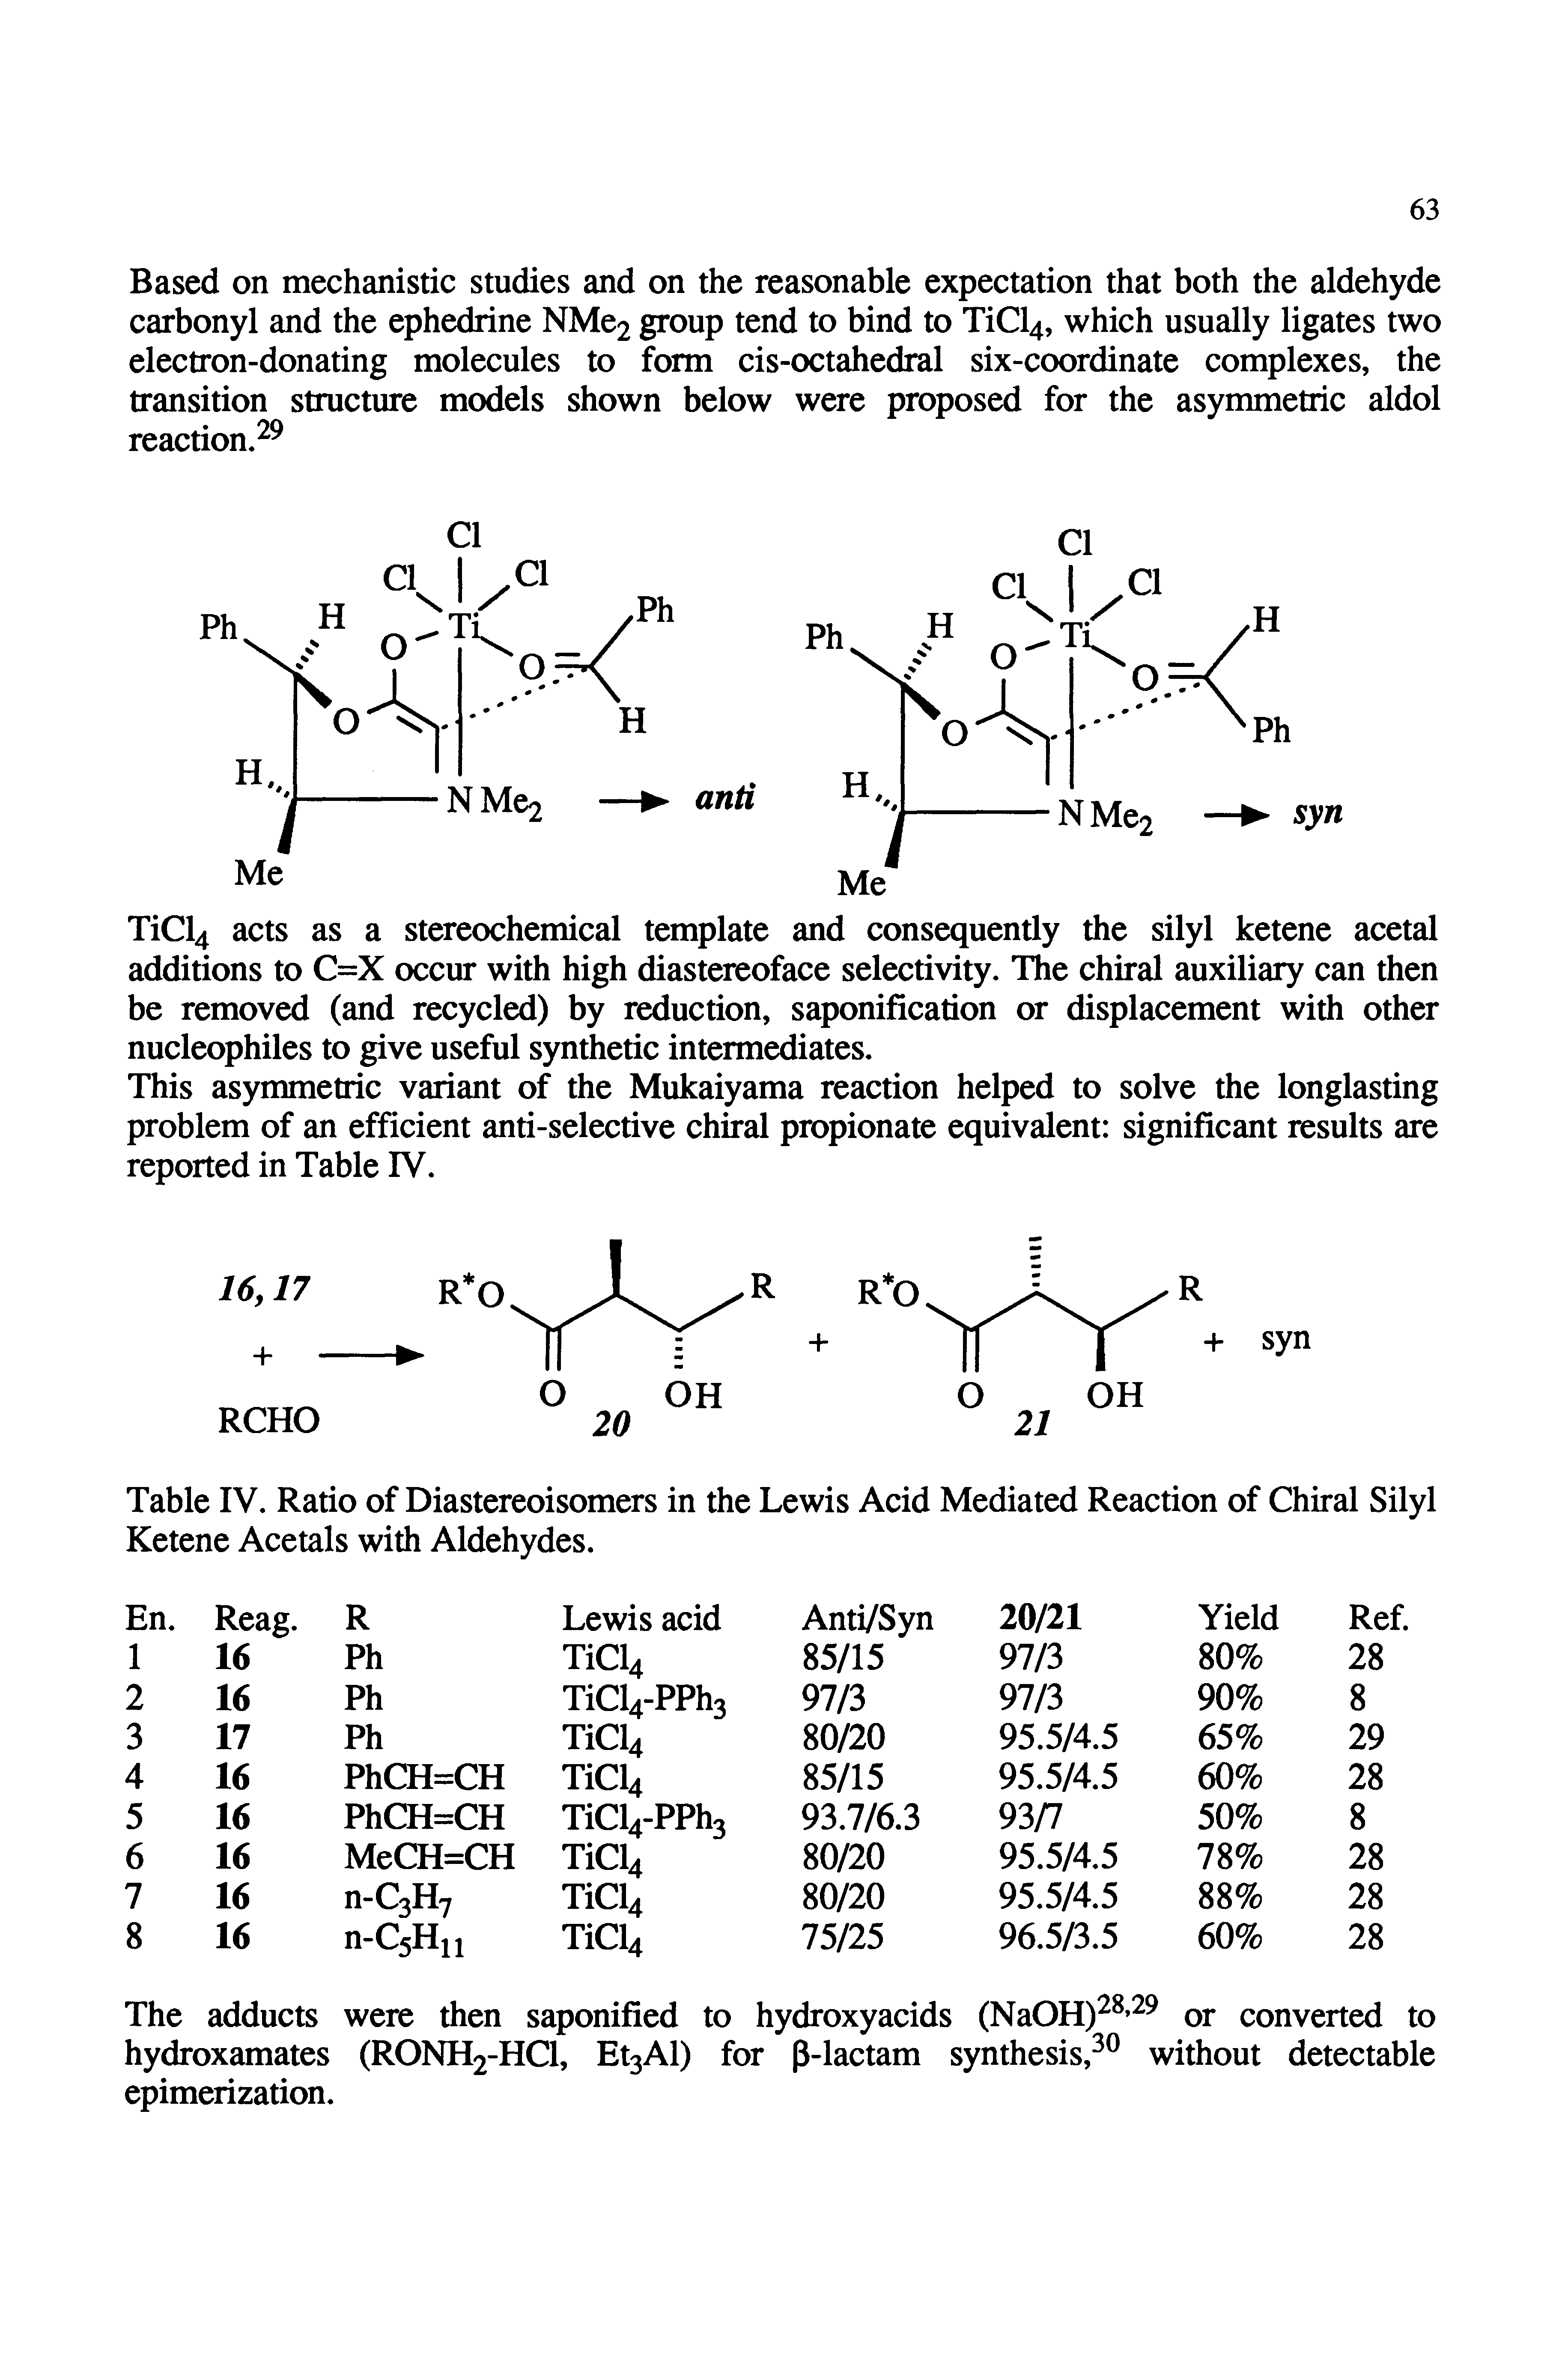 Table IV. Ratio of Diastereoisomers in the Lewis Acid Mediated Reaction of Chiral Silyl Ketene Acetals with Aldehydes.